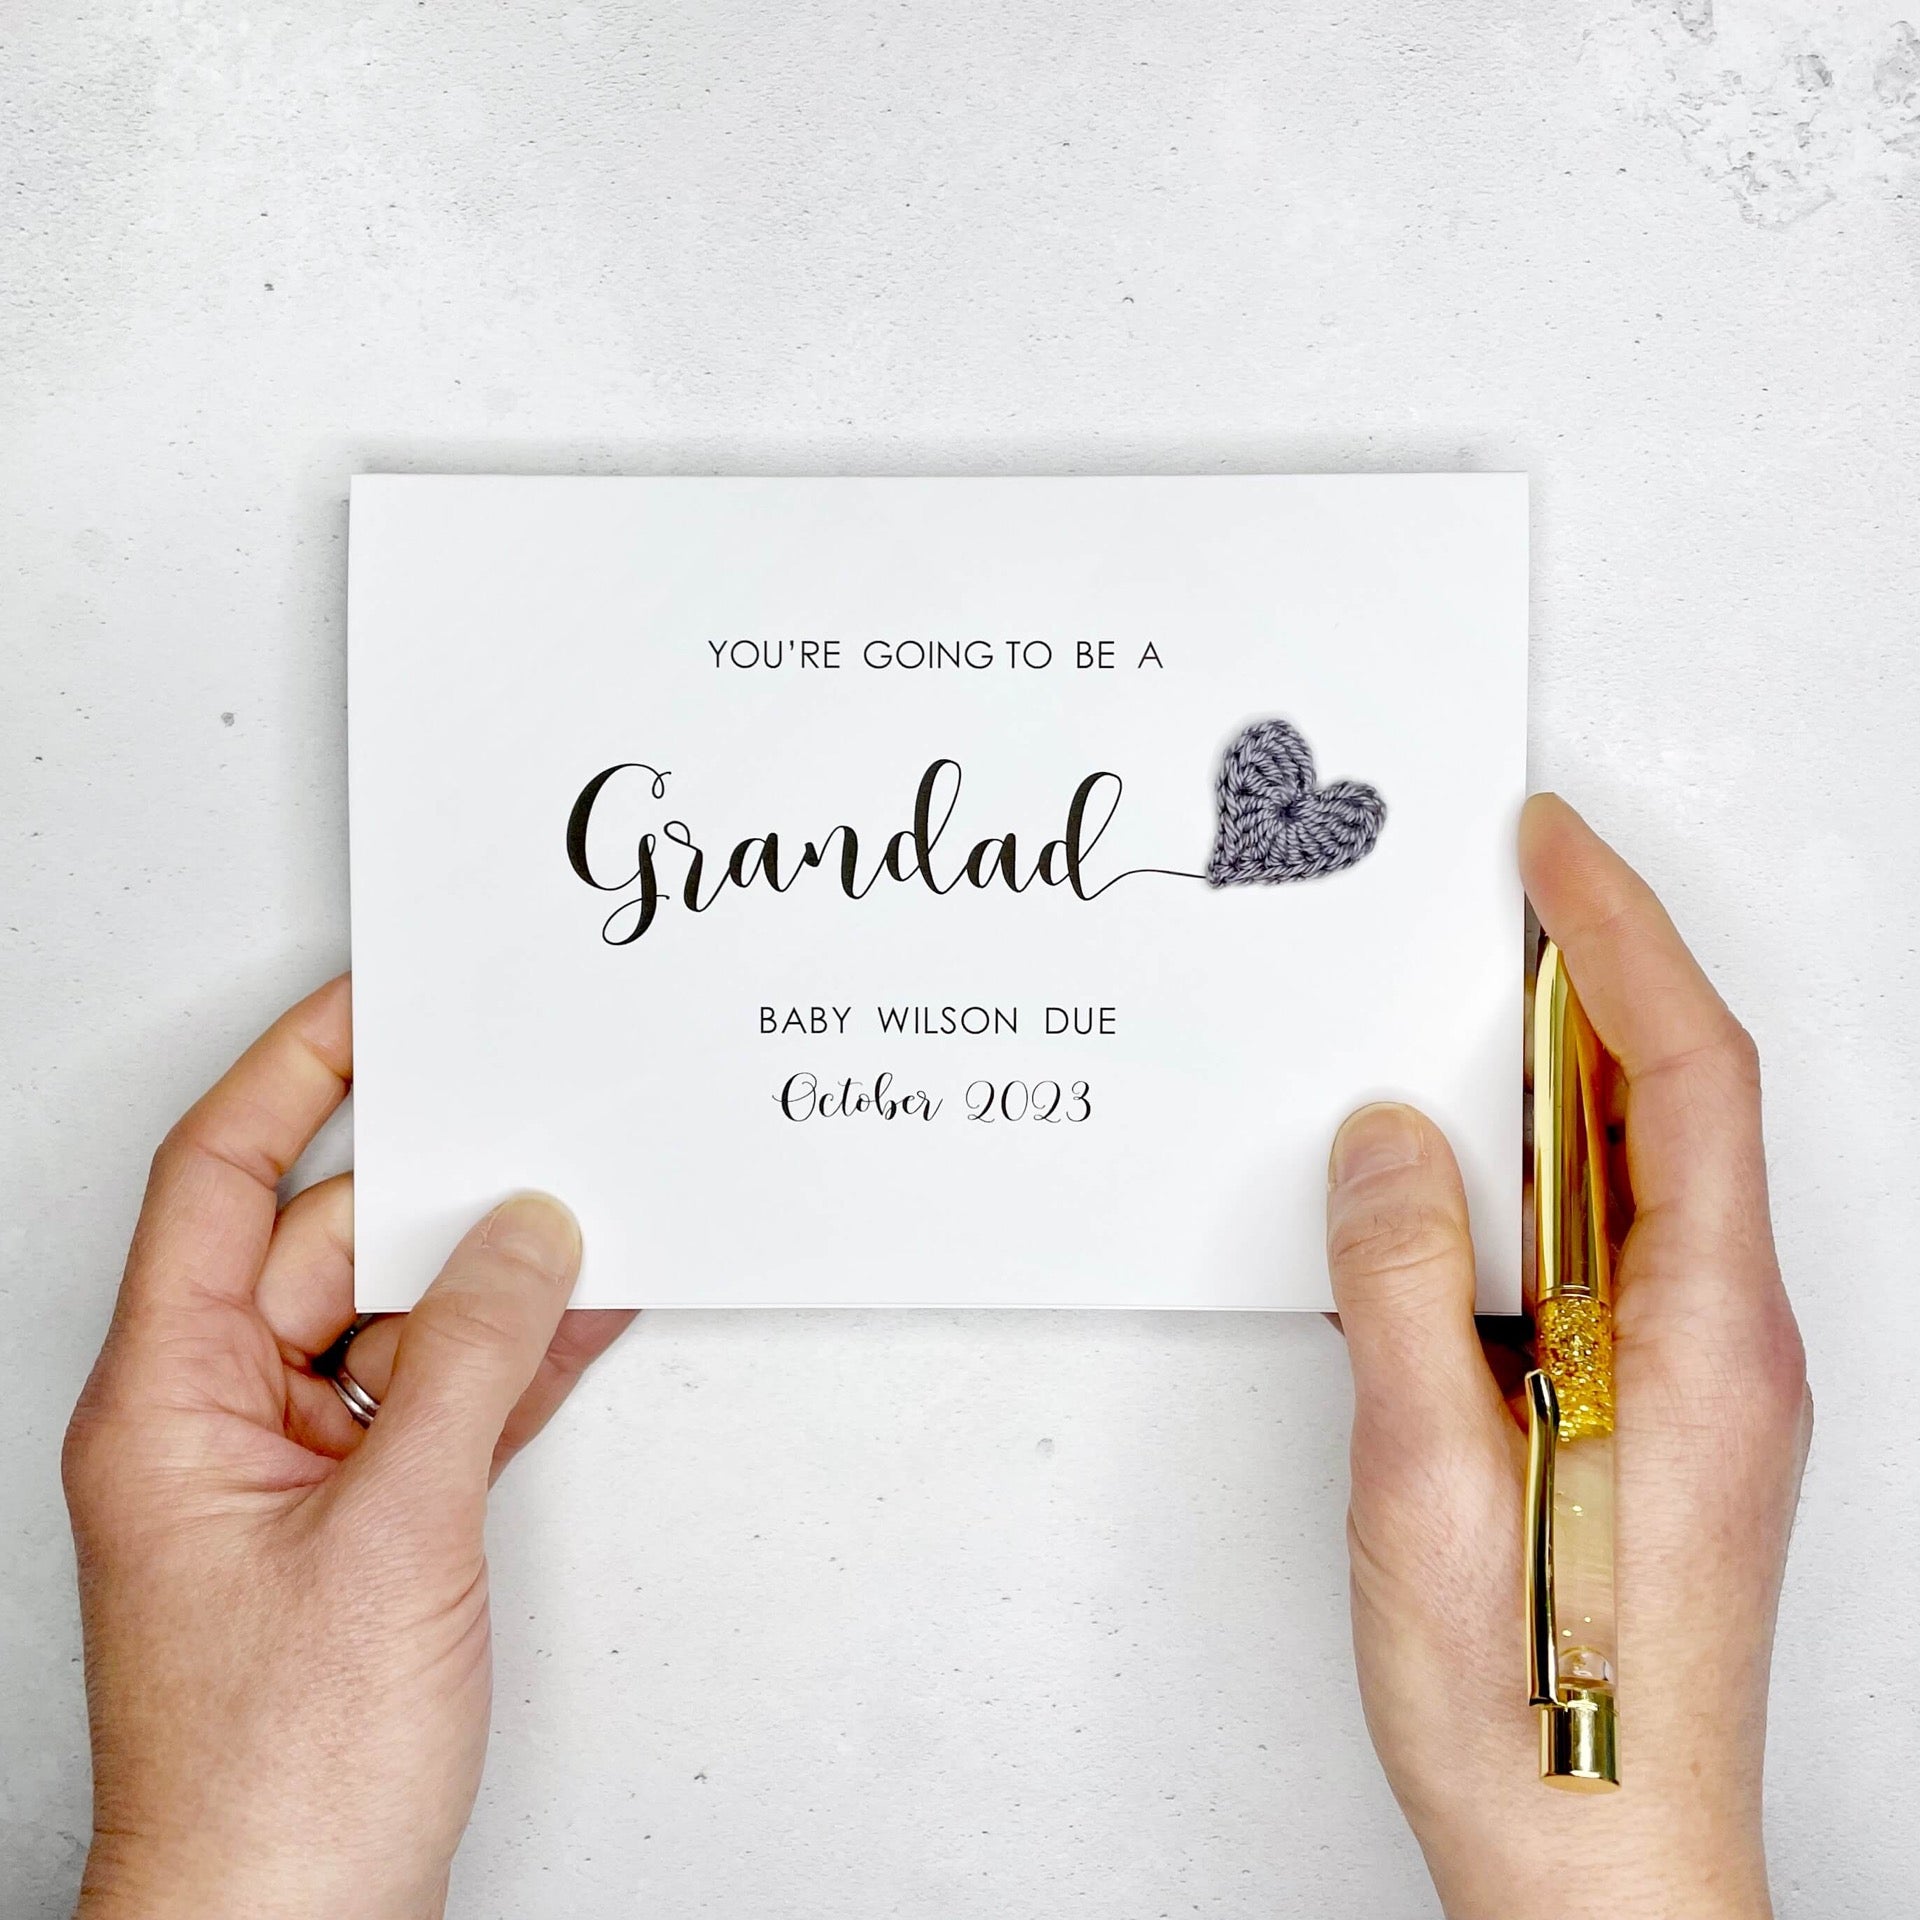 You're going to be a Grandad card